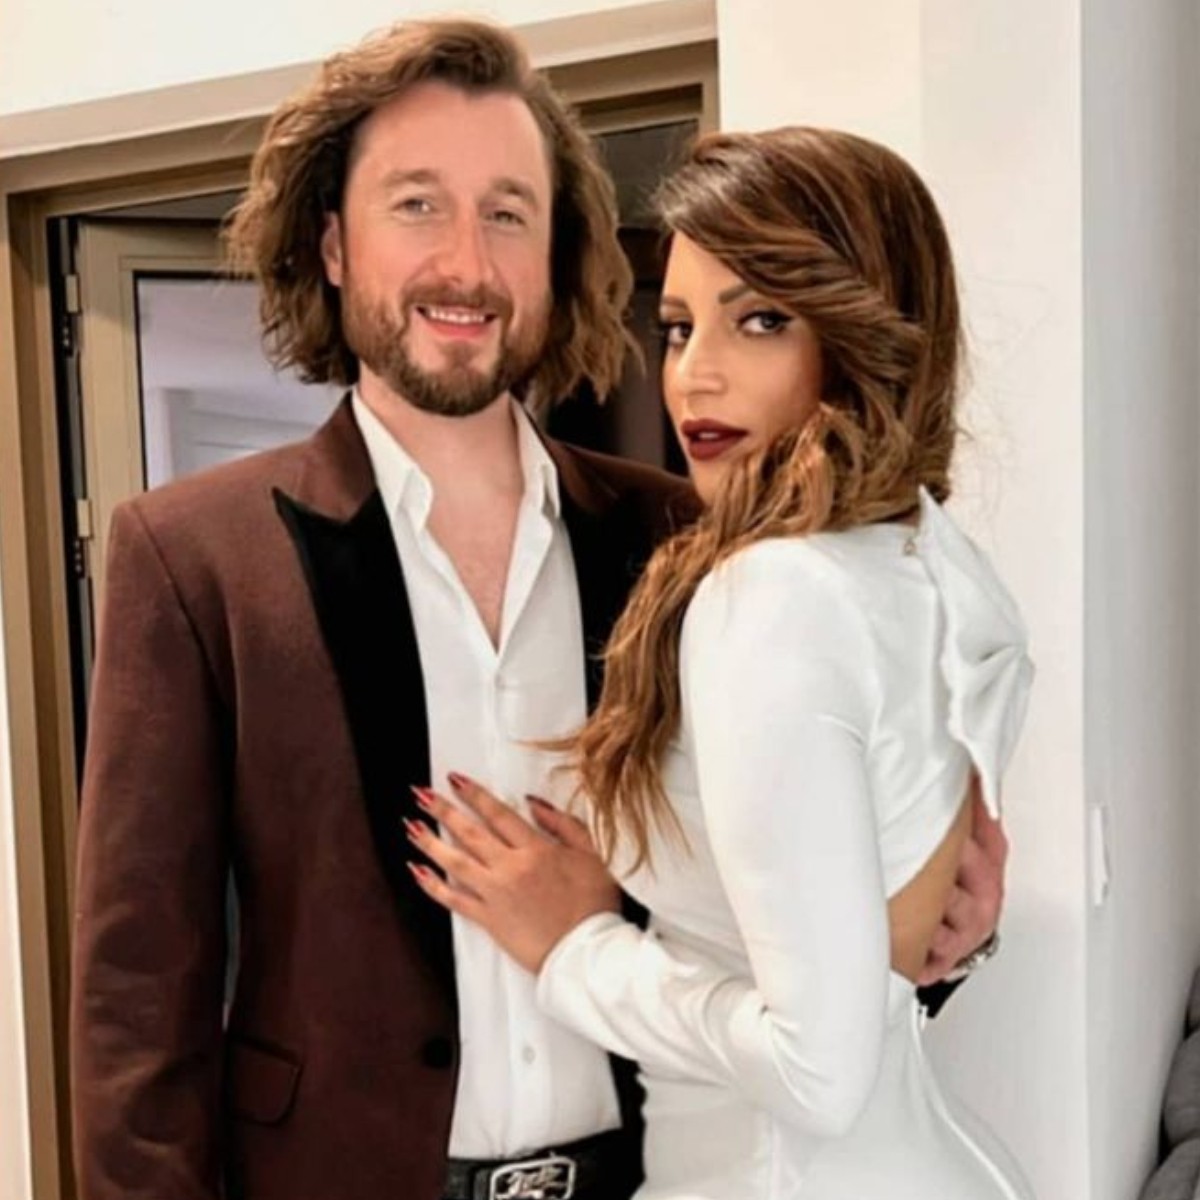 Exclusive: Shama Sikander & fiance James Milliron to get married this month